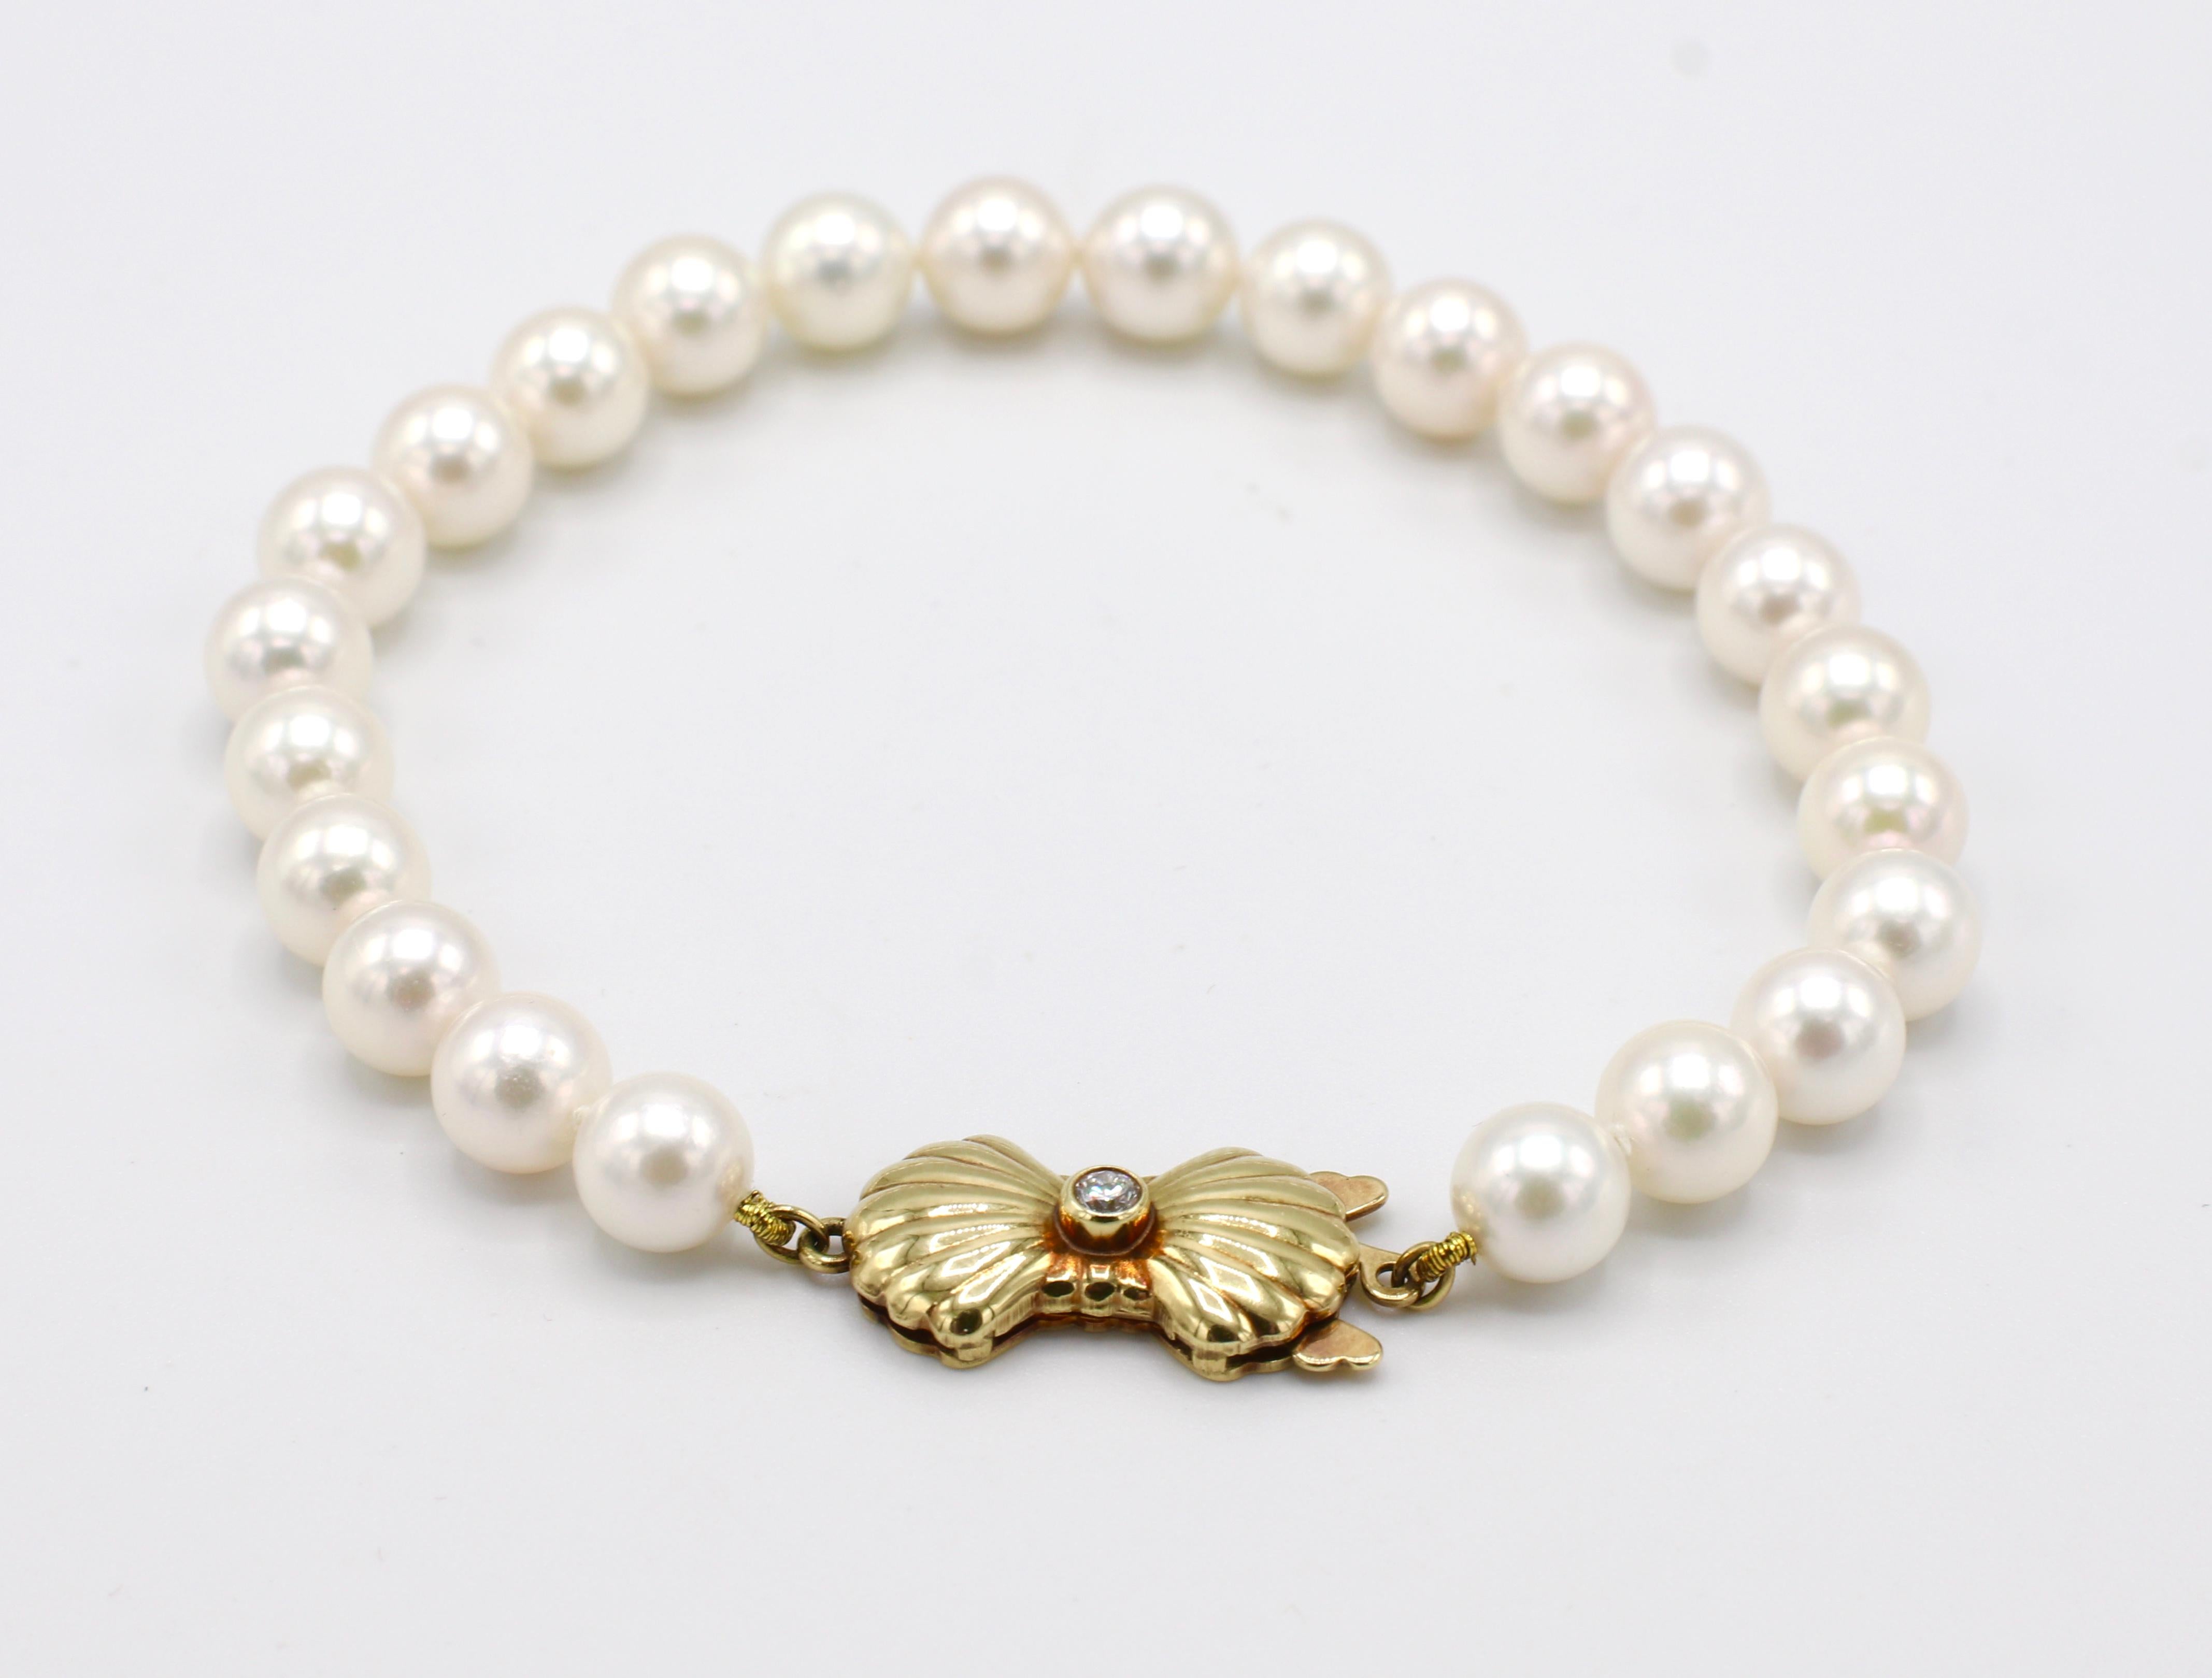 Blue Lagoon By Mikimoto Cultured Pearl & Diamond 14K Yellow Gold Clasp Bracelet 7 inches 

Metal: 14k yellow gold
Weight: 10.38 grams
Pearls: 6.1 - 6.5mm white creamy cultured pearls with high luster
Diamonds: 1 round brilliant cut diamond, approx.